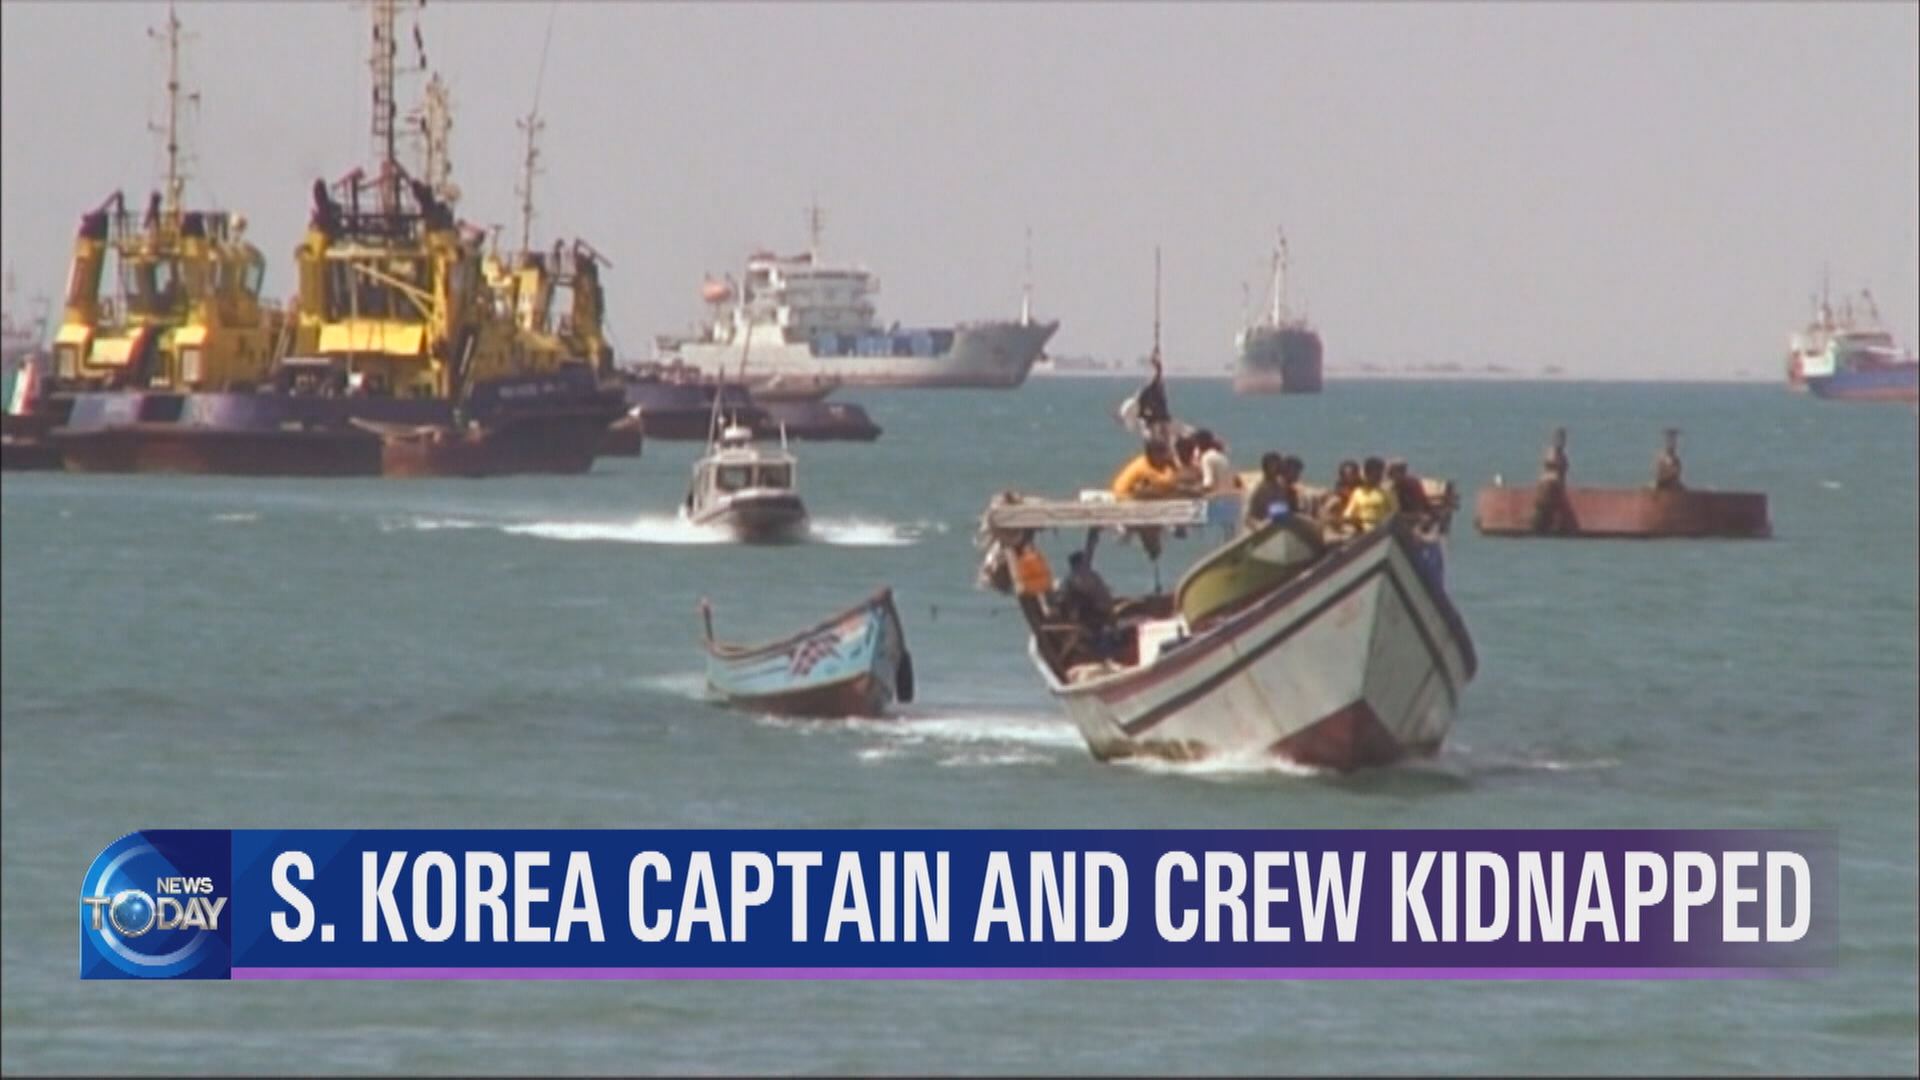 S. KOREA CAPTAIN AND CREW KIDNAPPED